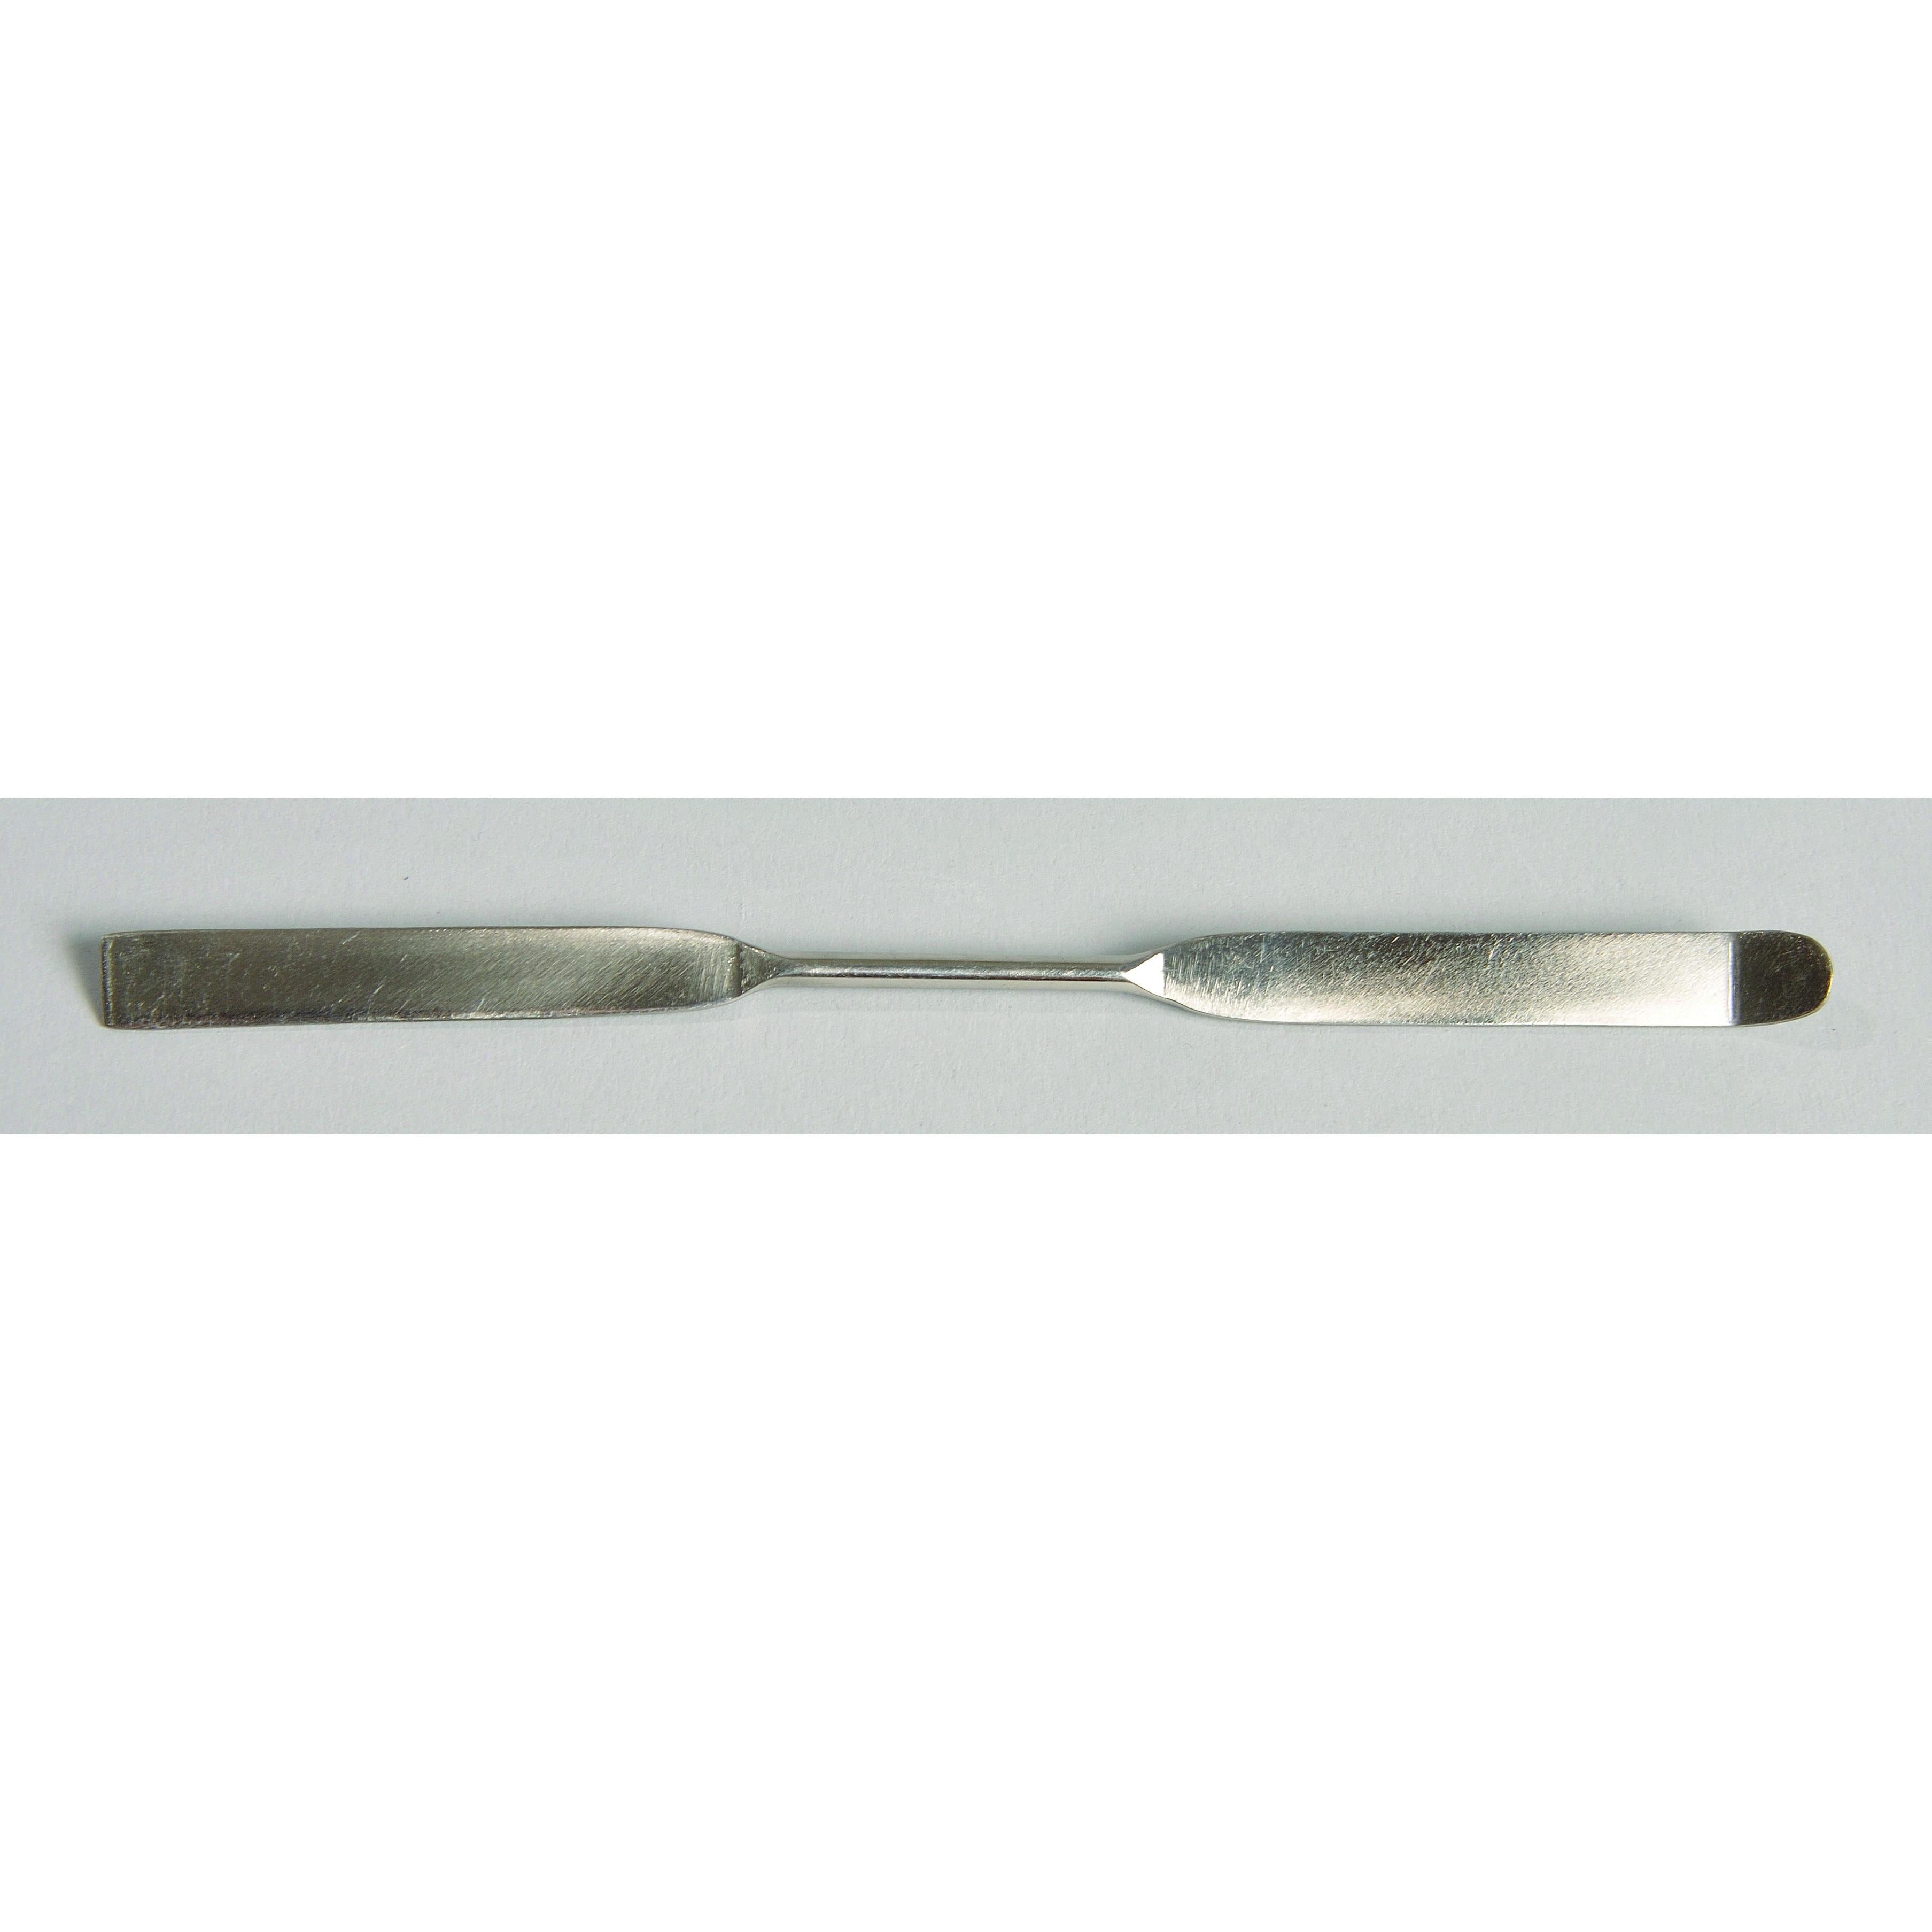 Spatula, Stainless Steel, with Flat and Bent Ends